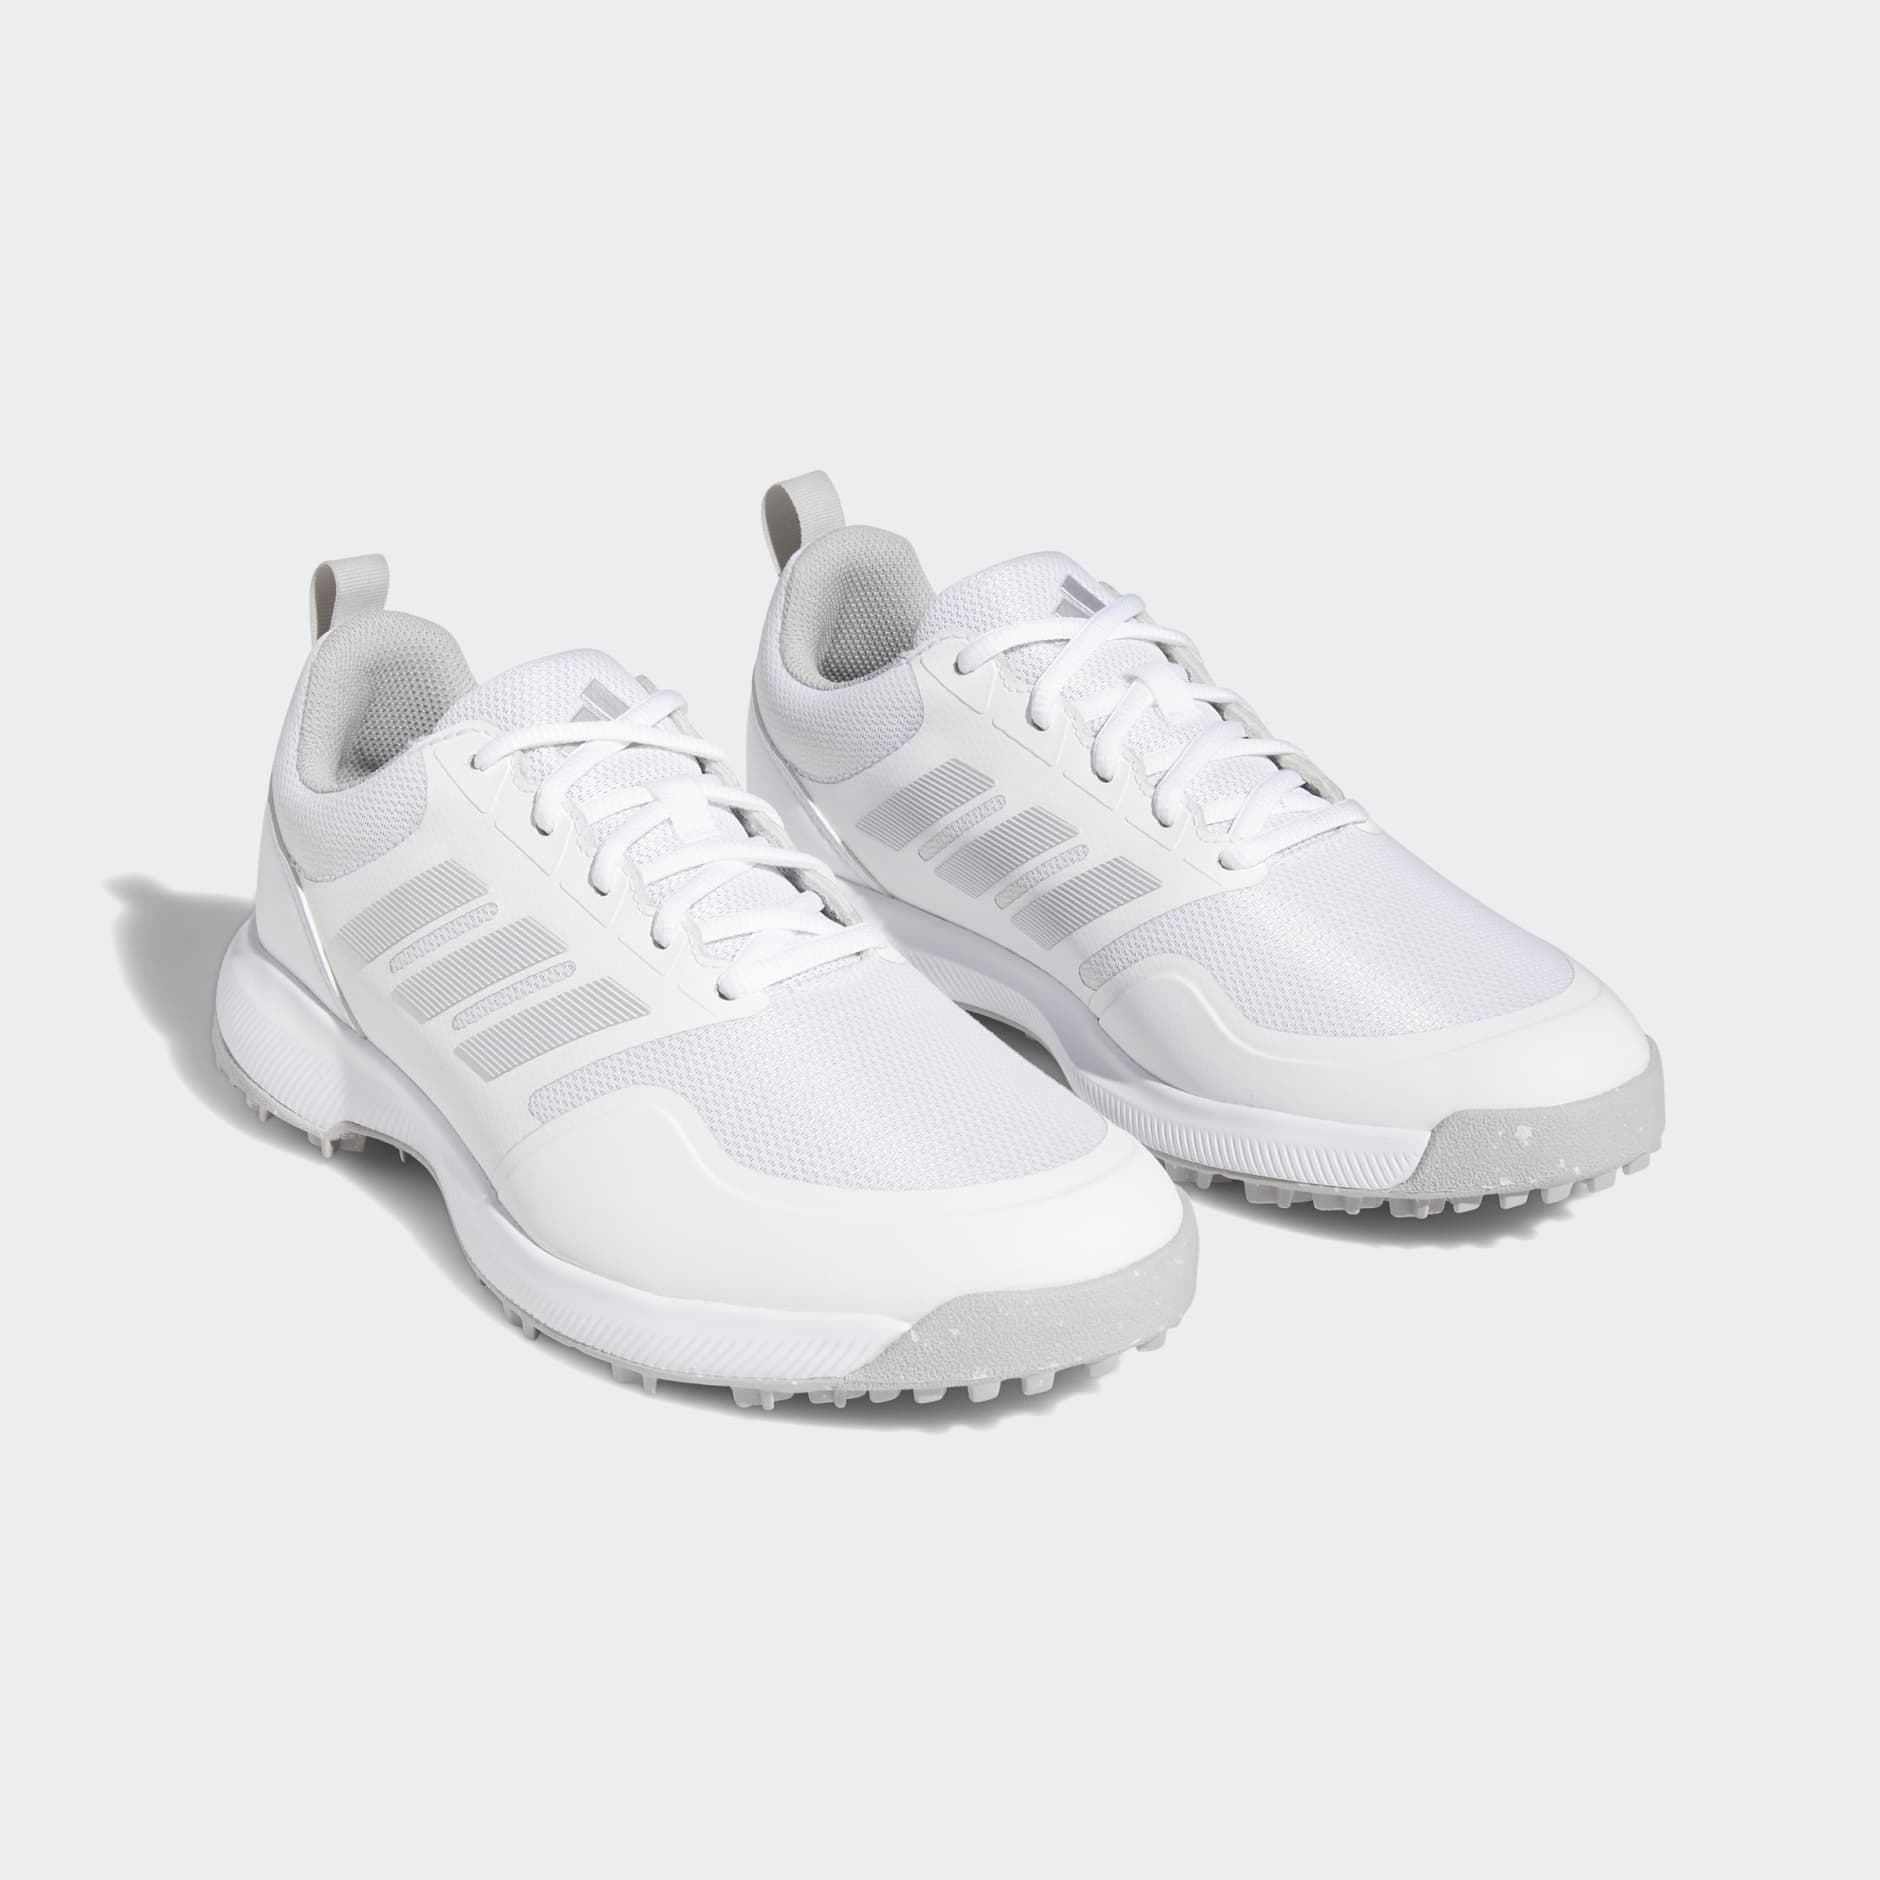 Shoes - Tech Response SL 3.0 Golf Shoes - White | adidas South Africa